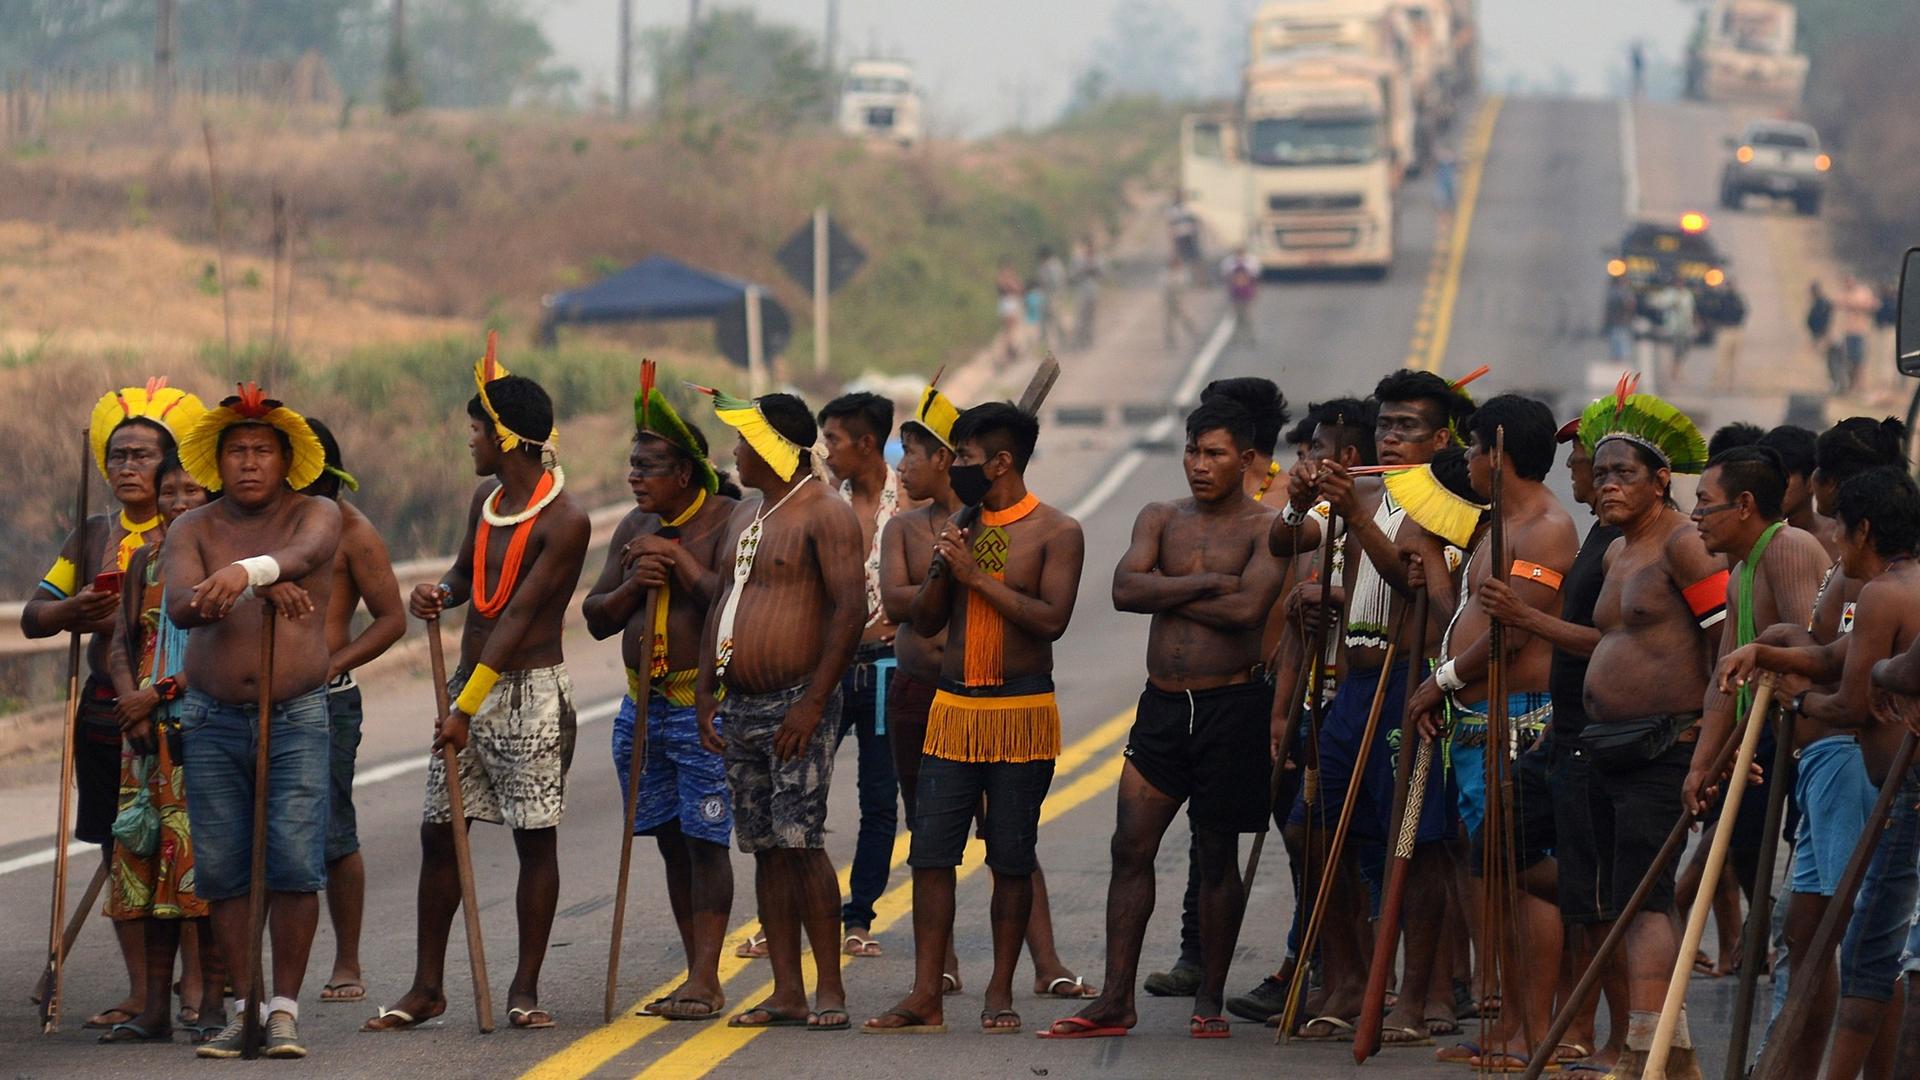 Kayapó indigenous people block Brazil's BR 163 national highway, as they protest against the government measures in the indigenous lands to avoid the spread of the coronavirus disease (COVID-19), in Novo Progresso, Pará state, Brazil, Aug. 17, 2020.